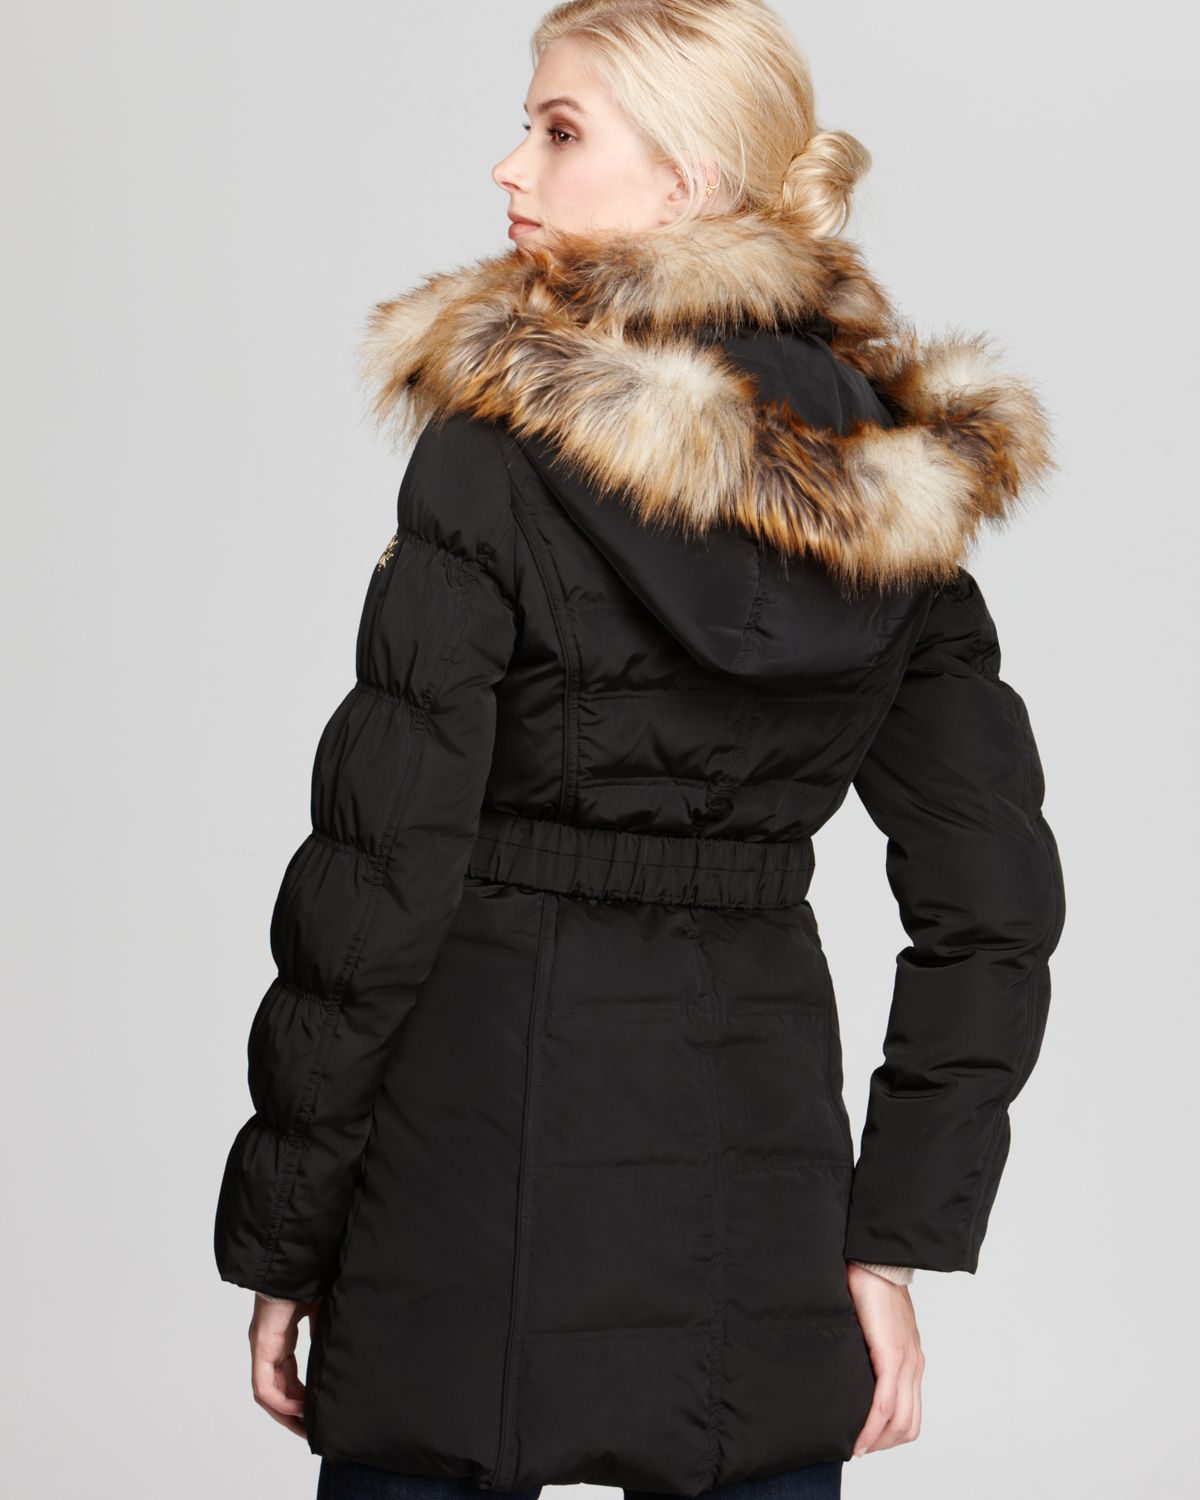 Laundry by shelli segal Quilted Belted Coat with Faux Fur Hood in Black